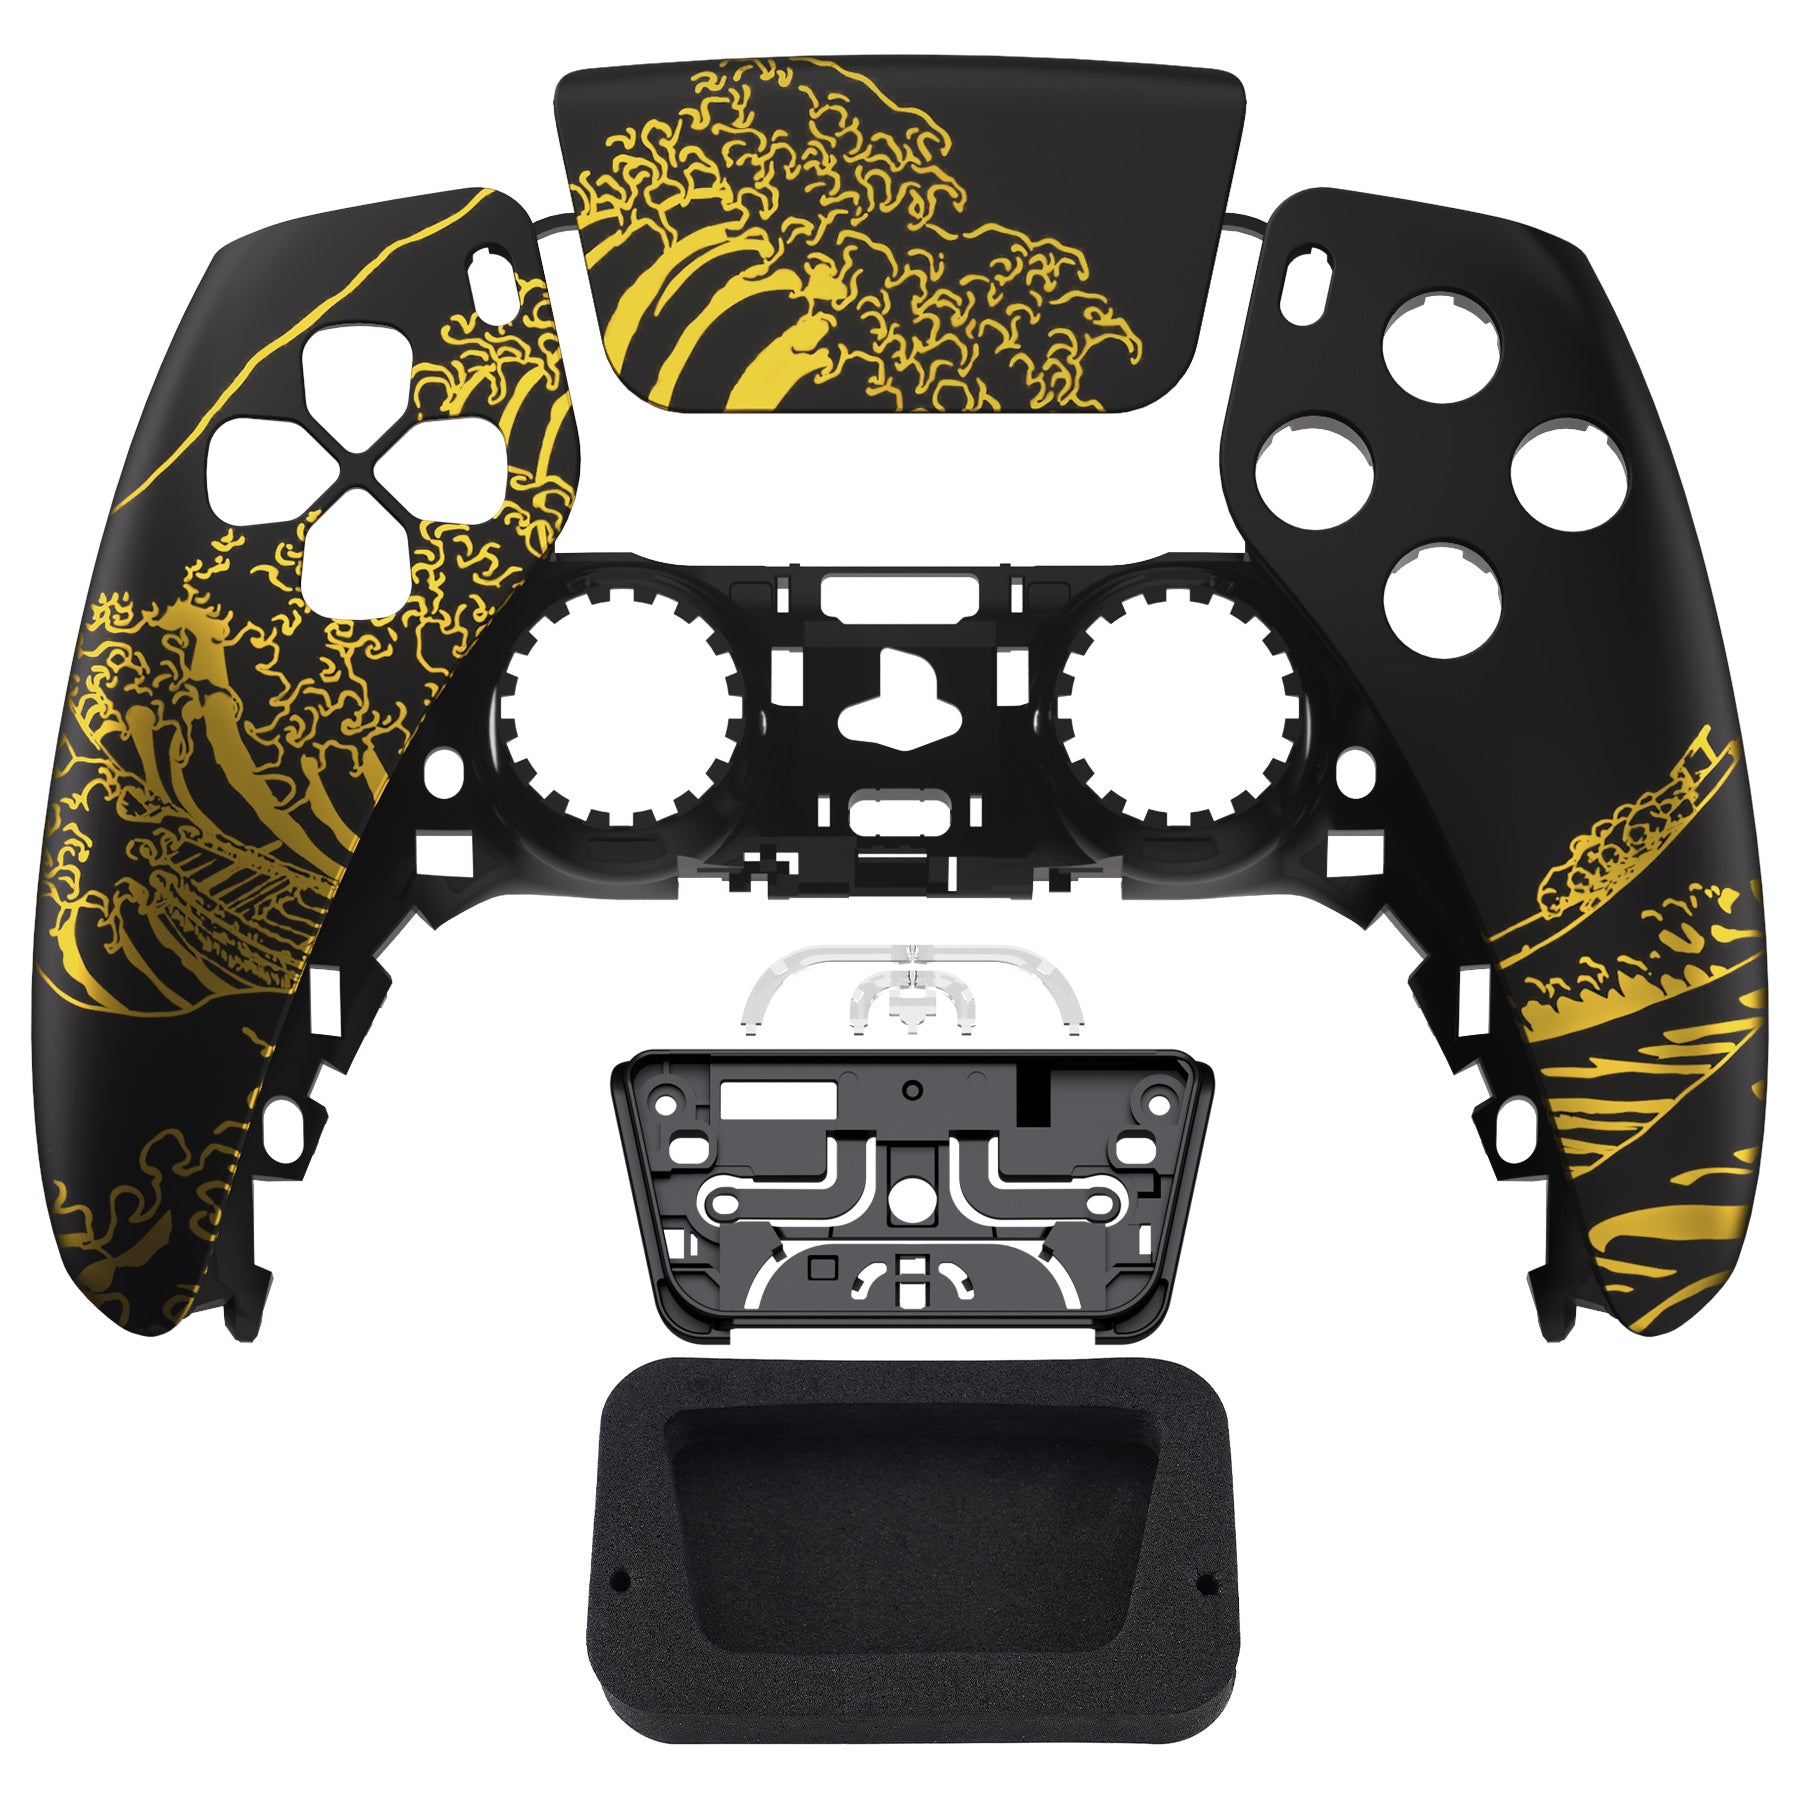 The Great GOLDEN Wave Off Kanagawa - Black Front Shell With Touchpad For PS5  Controller BDM-010 & BDM-020 & BDM-030 – Extremerate Wholesale